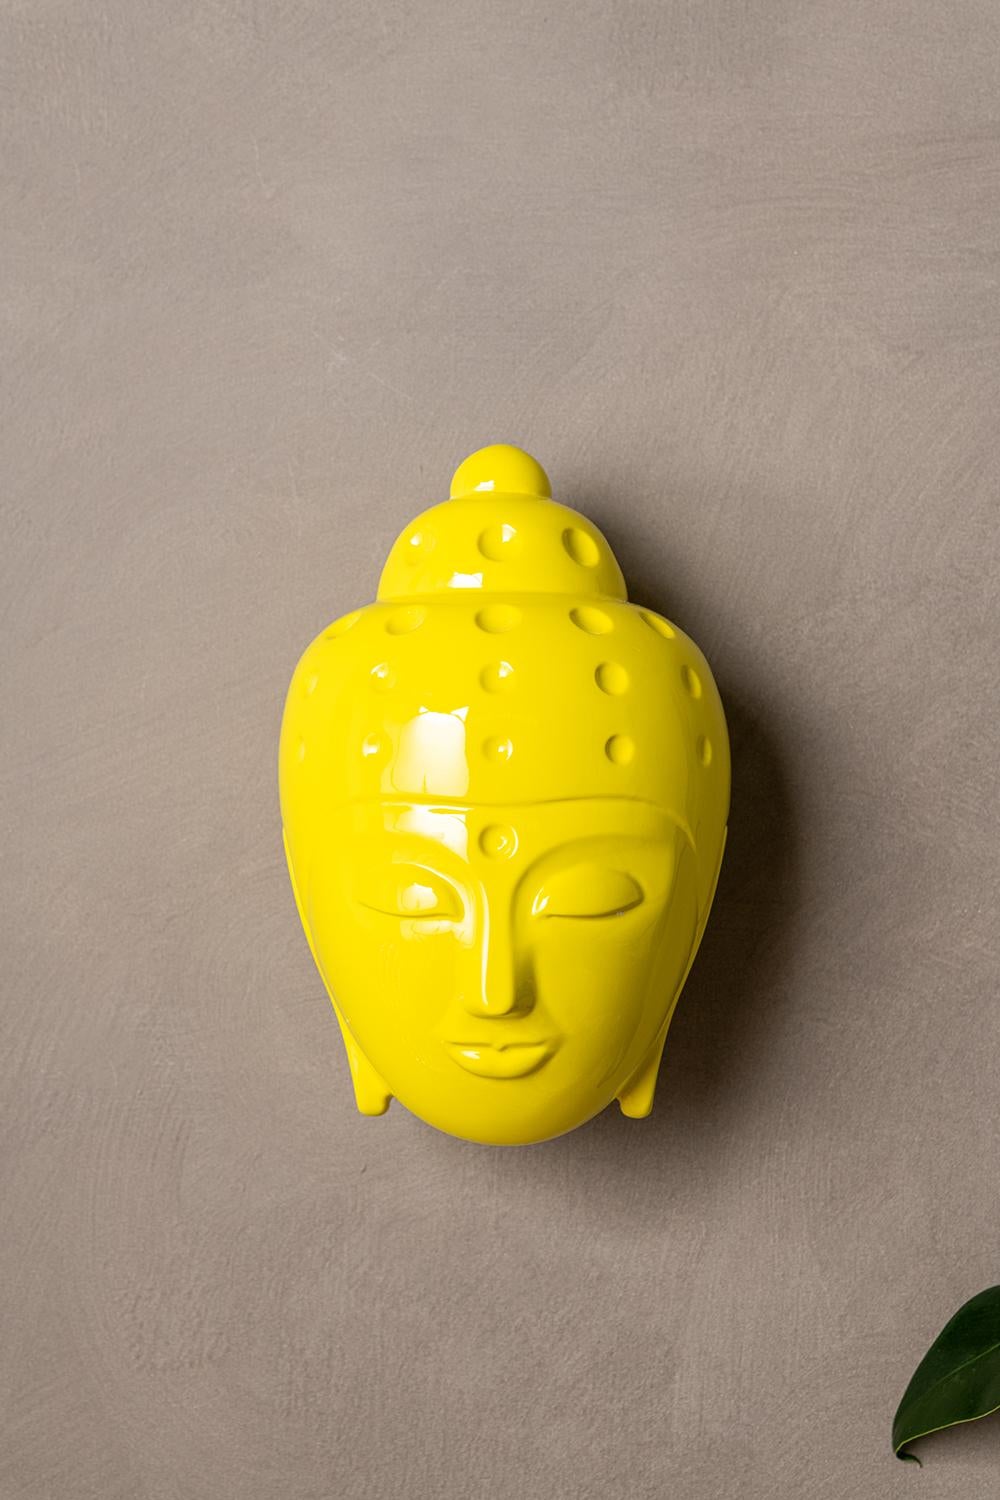 Contemporary buddha head sculpture - painted in yellow car paint